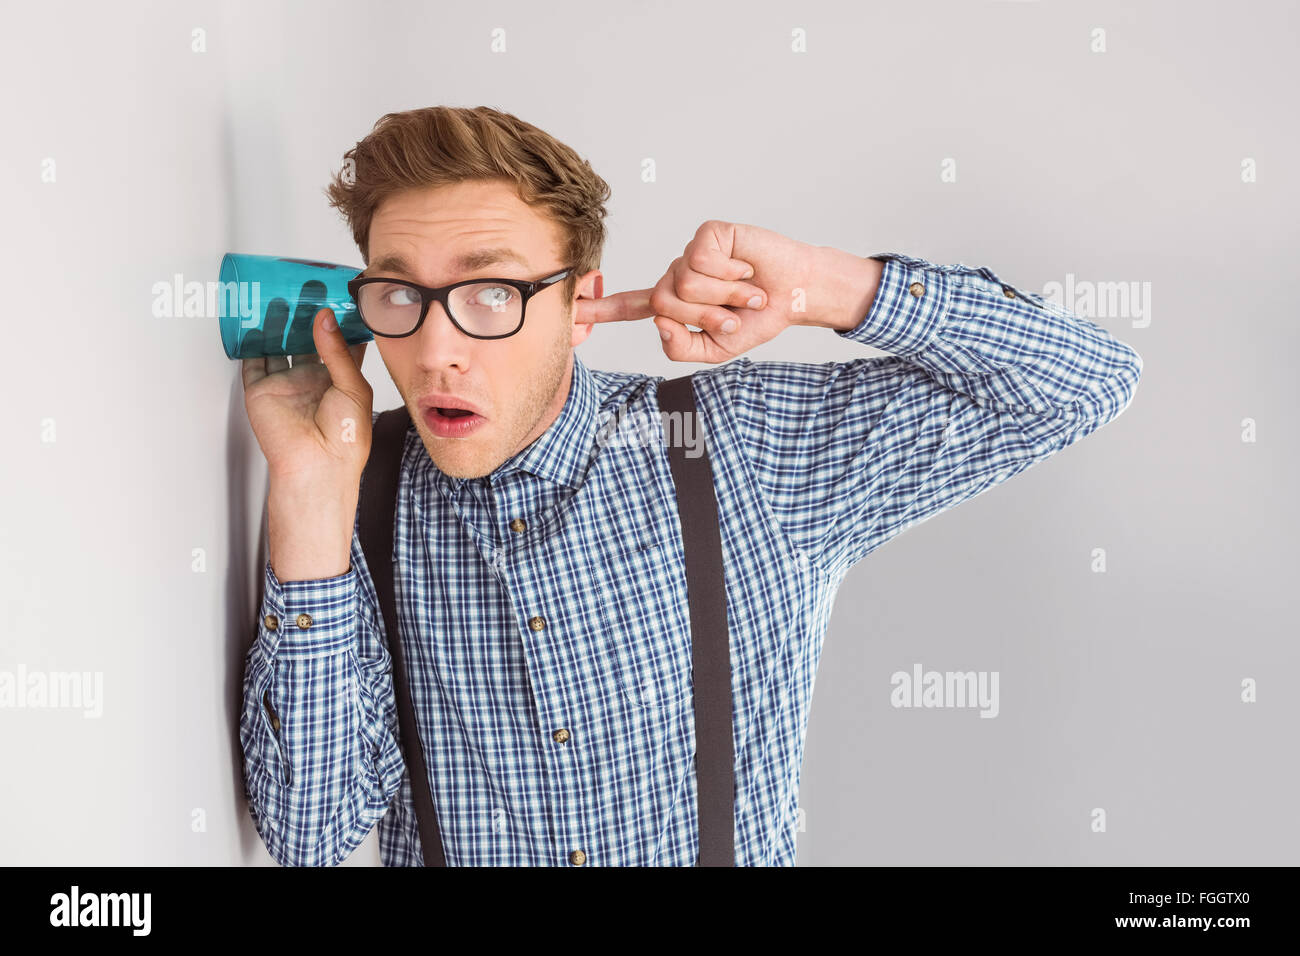 Geeky businessman eavesdropping with cup Stock Photo